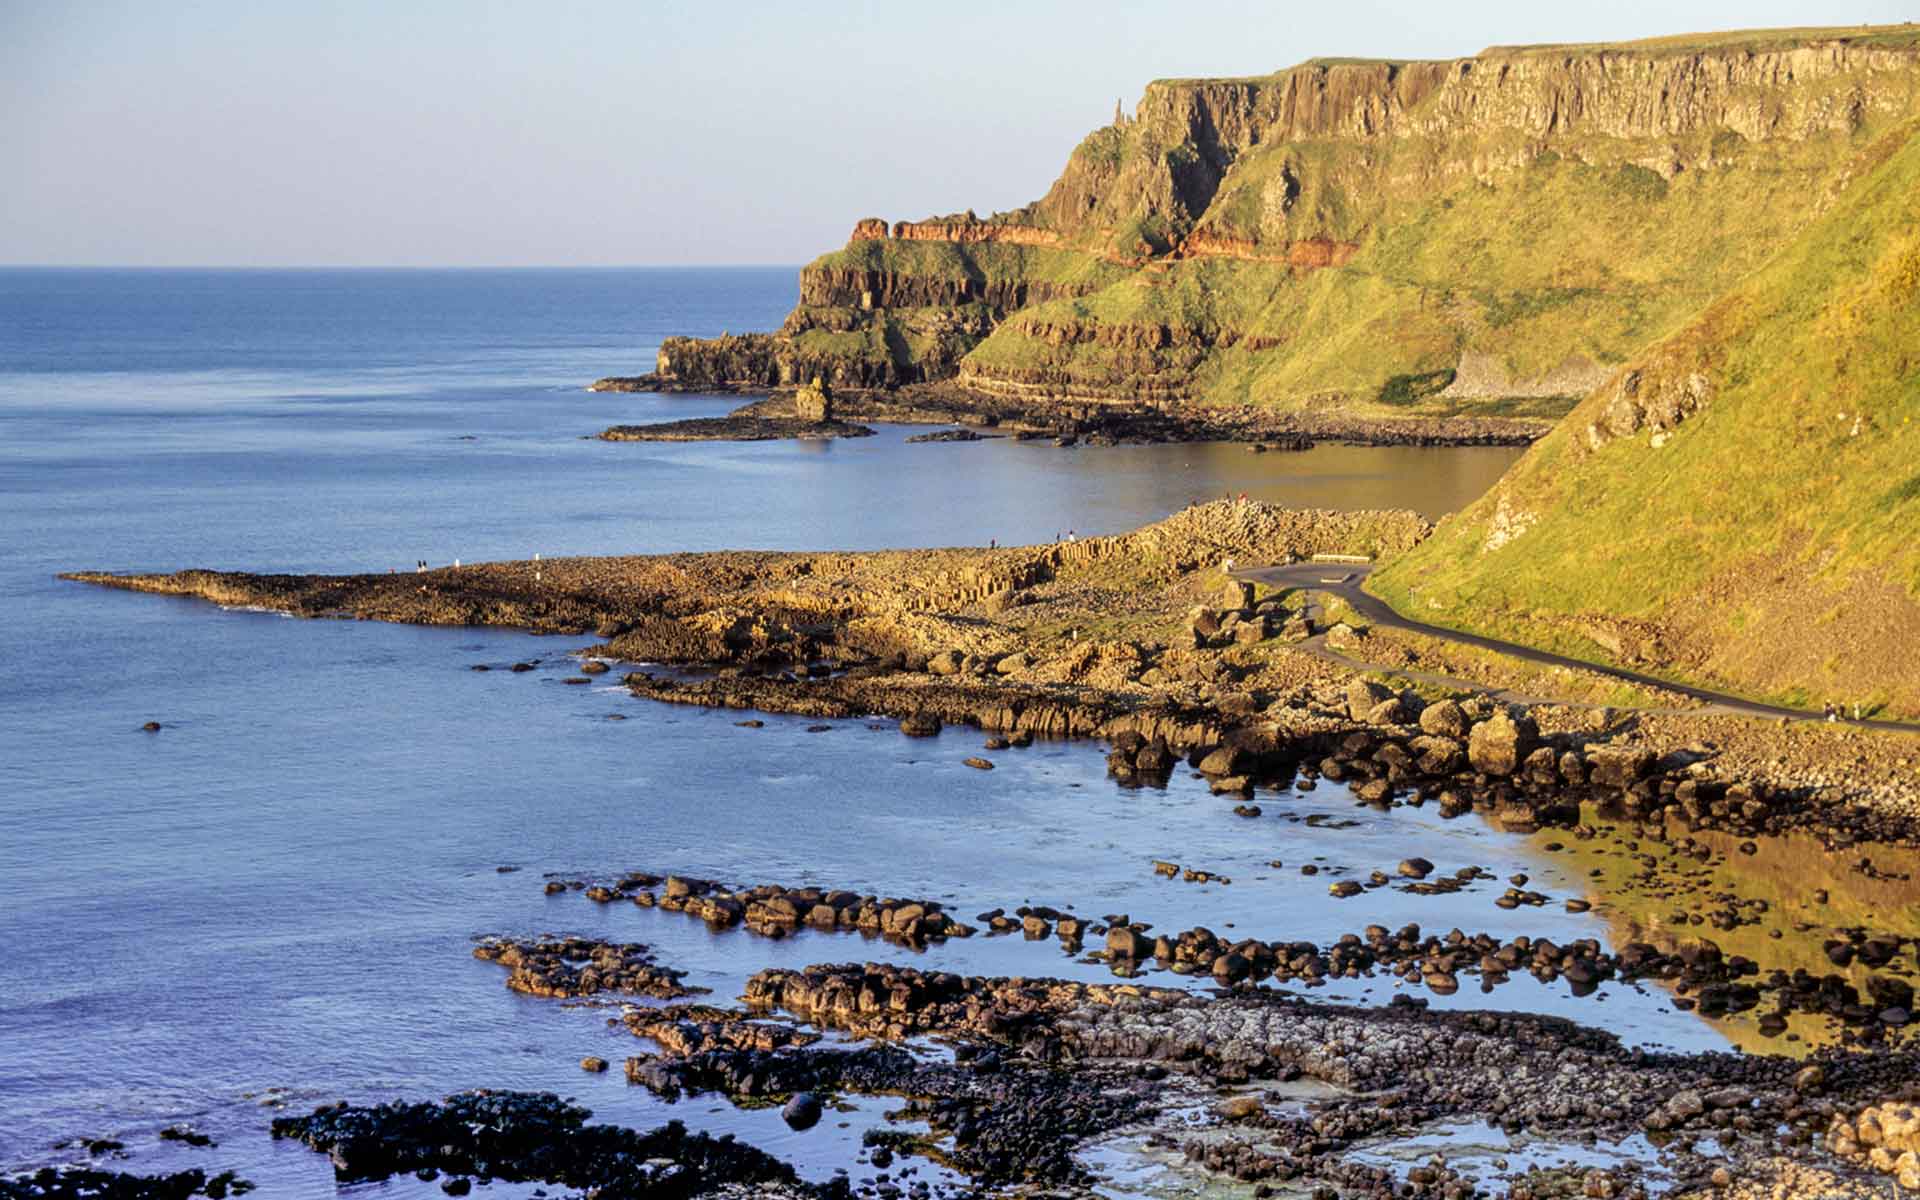 The cliffs of the Causeway Coast